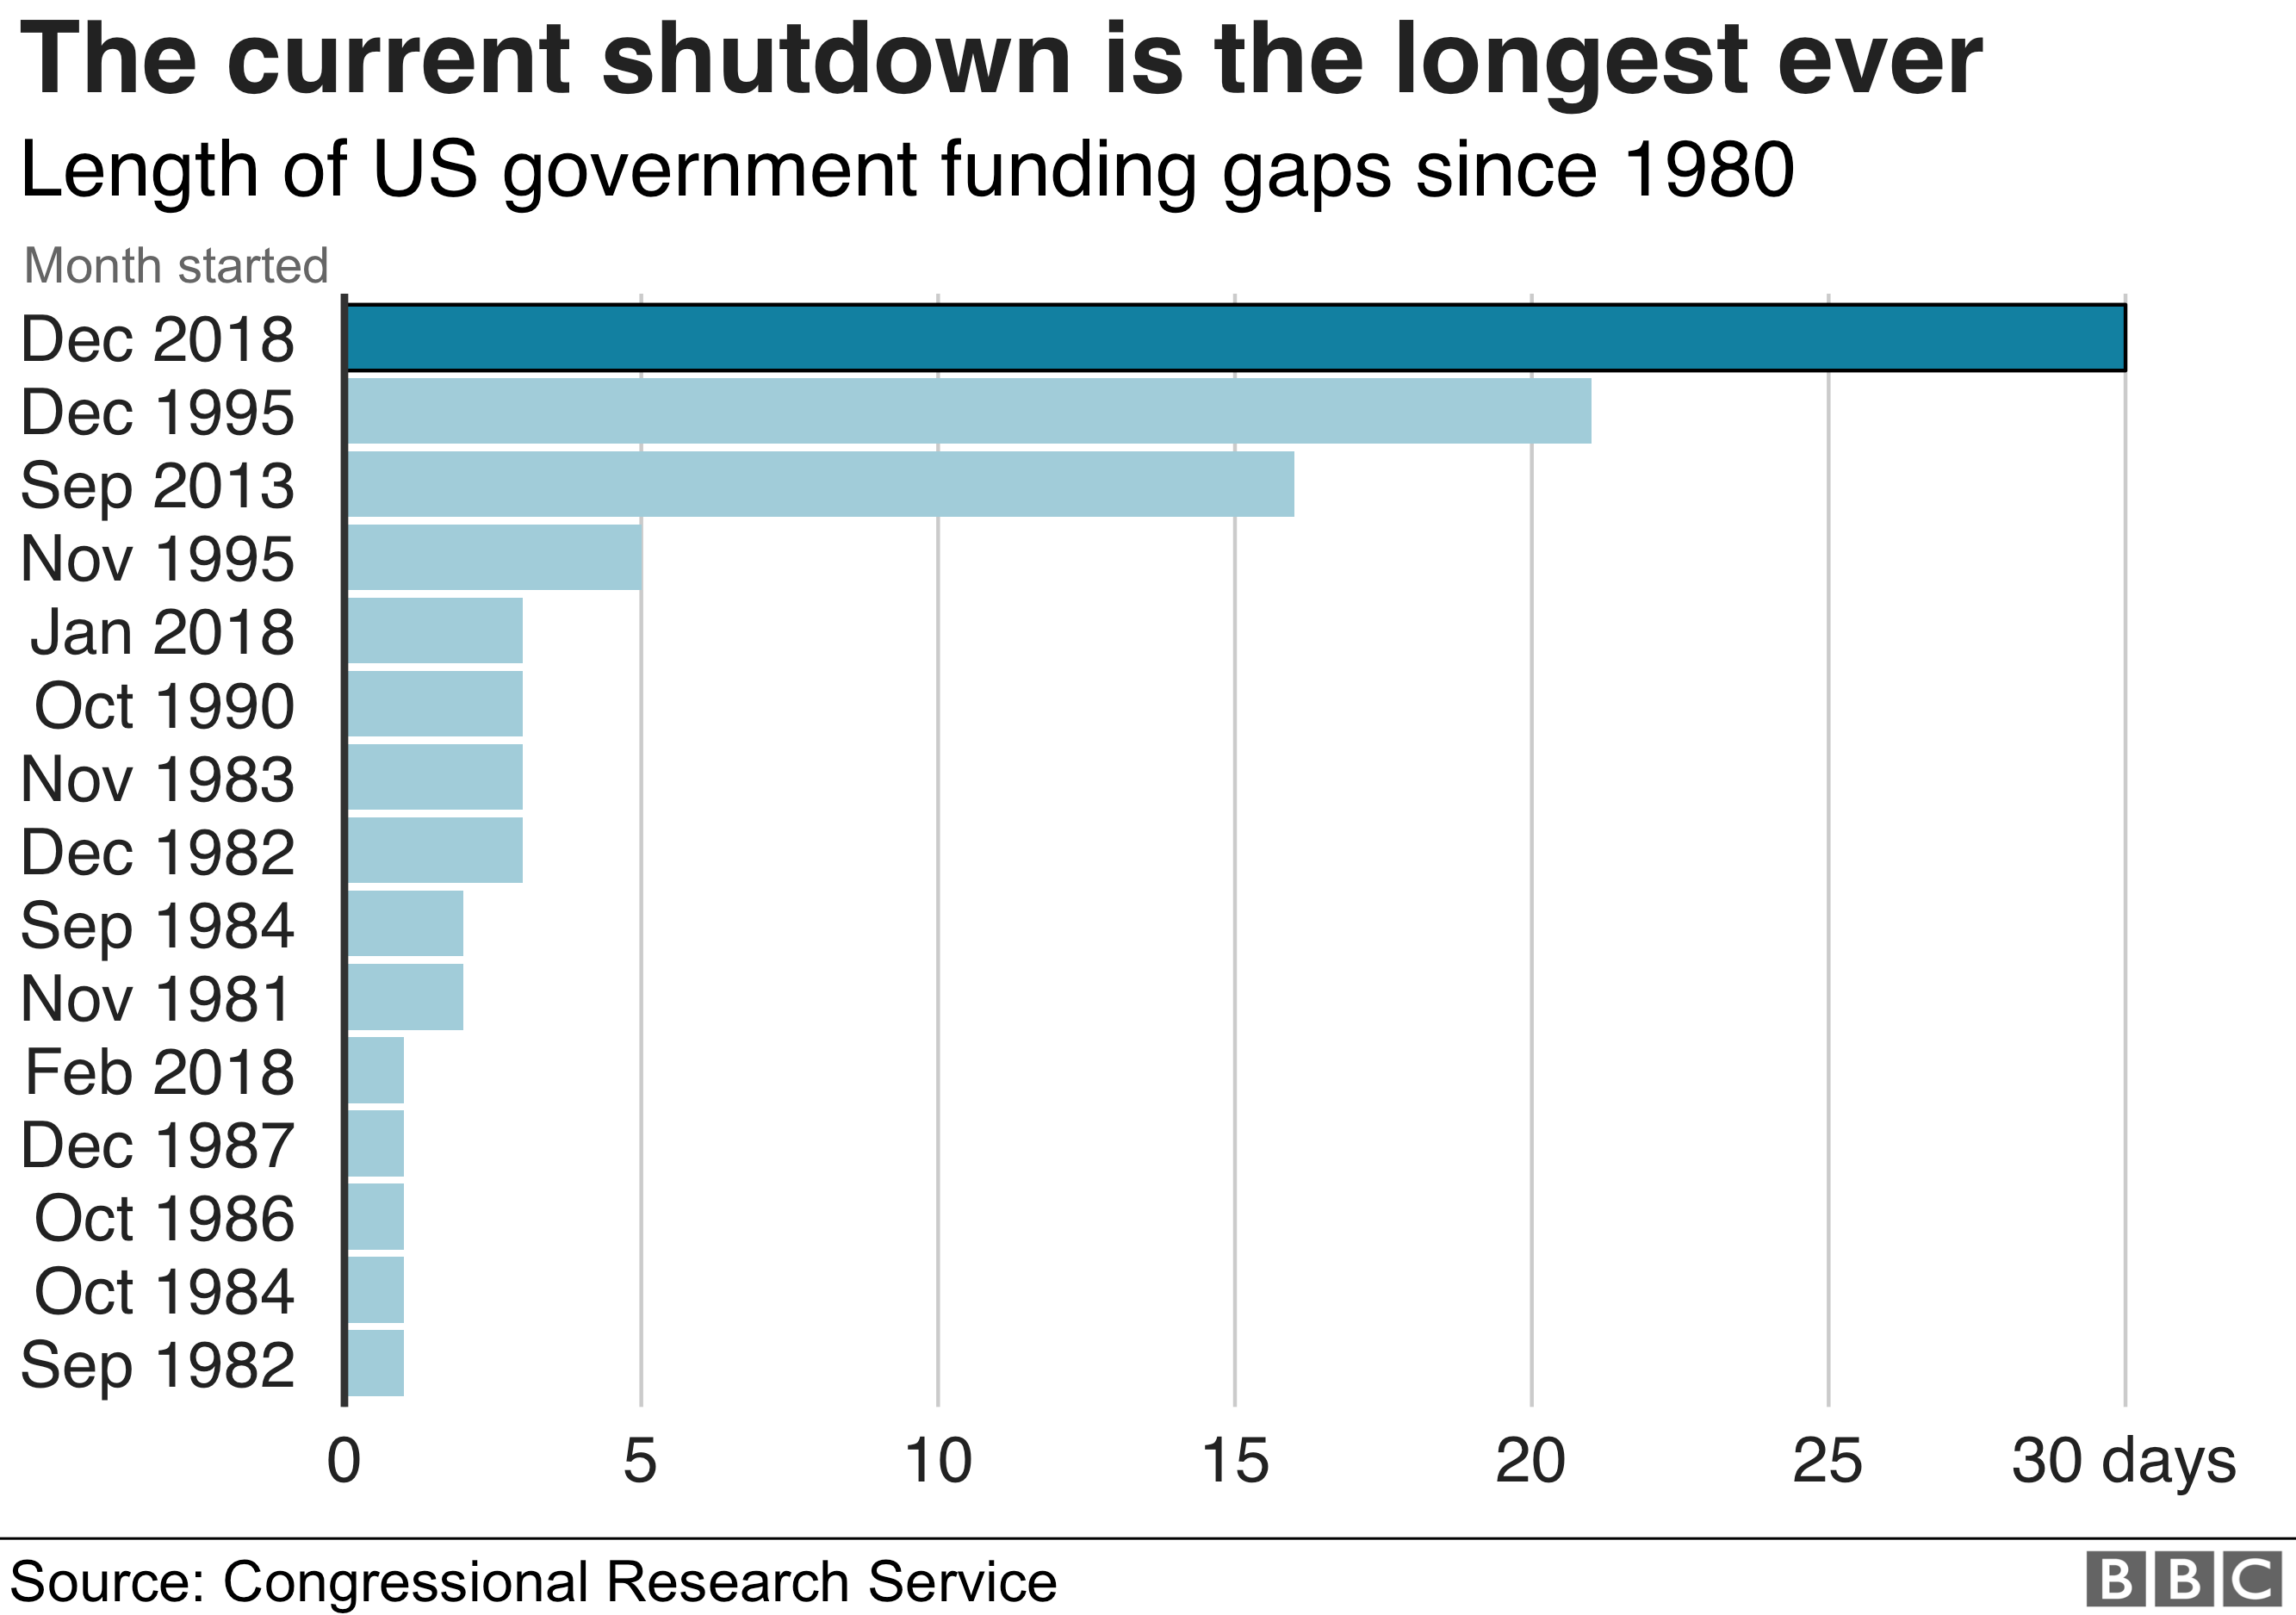 Chart showing length of shutdowns in the US